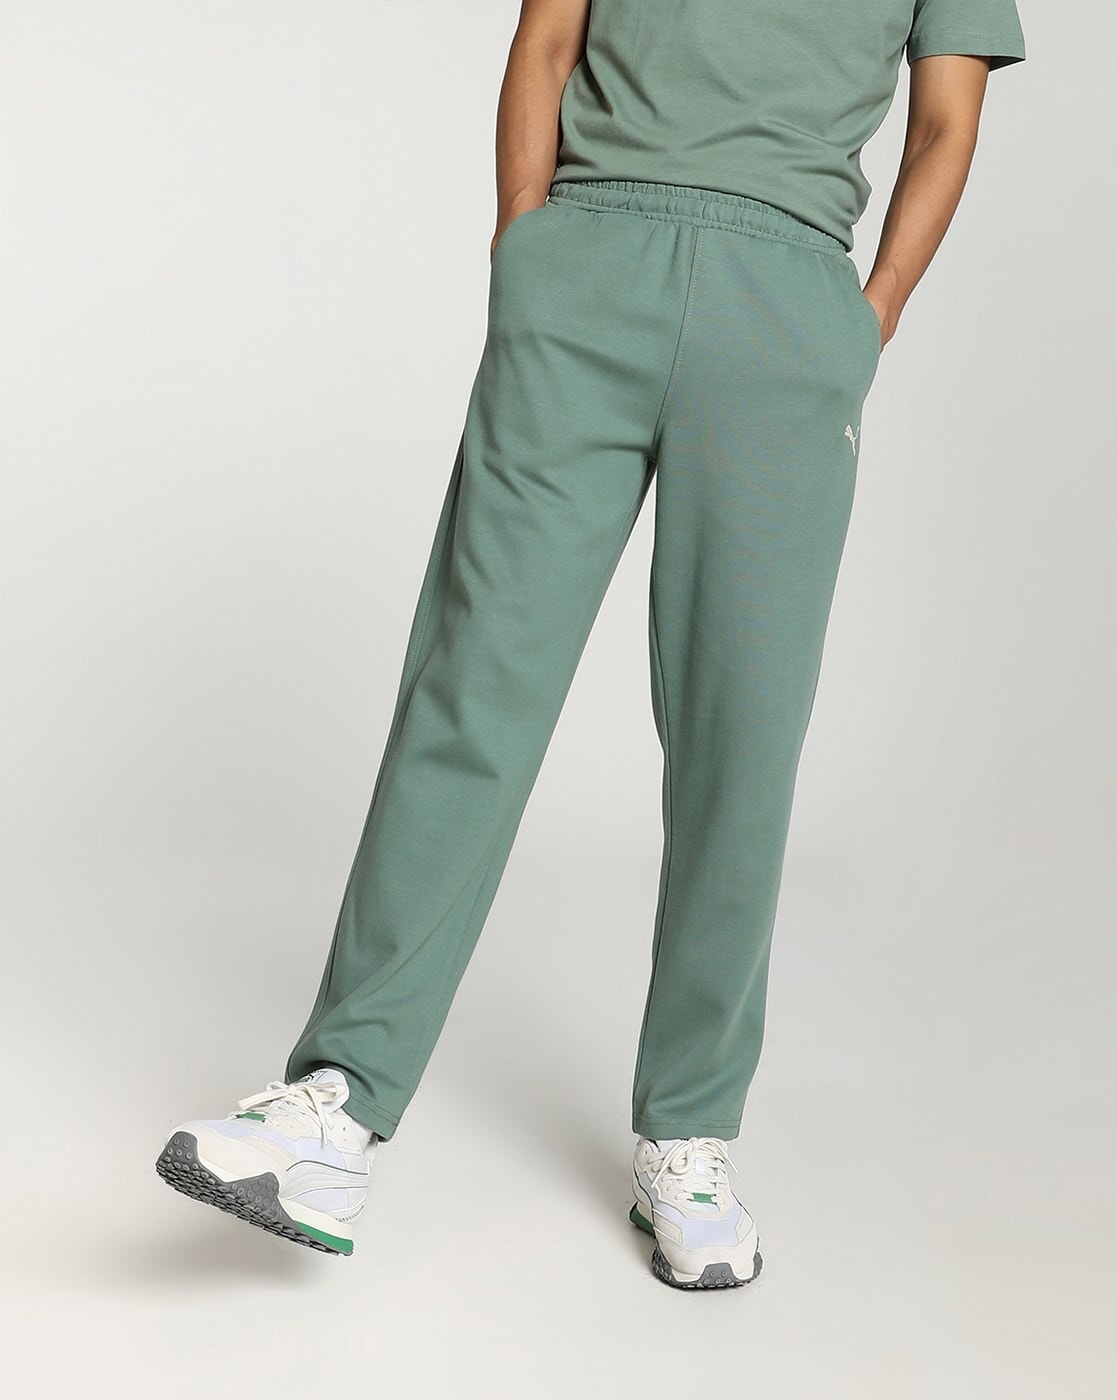 GAIAM Green Active Pants Size XL - 52% off